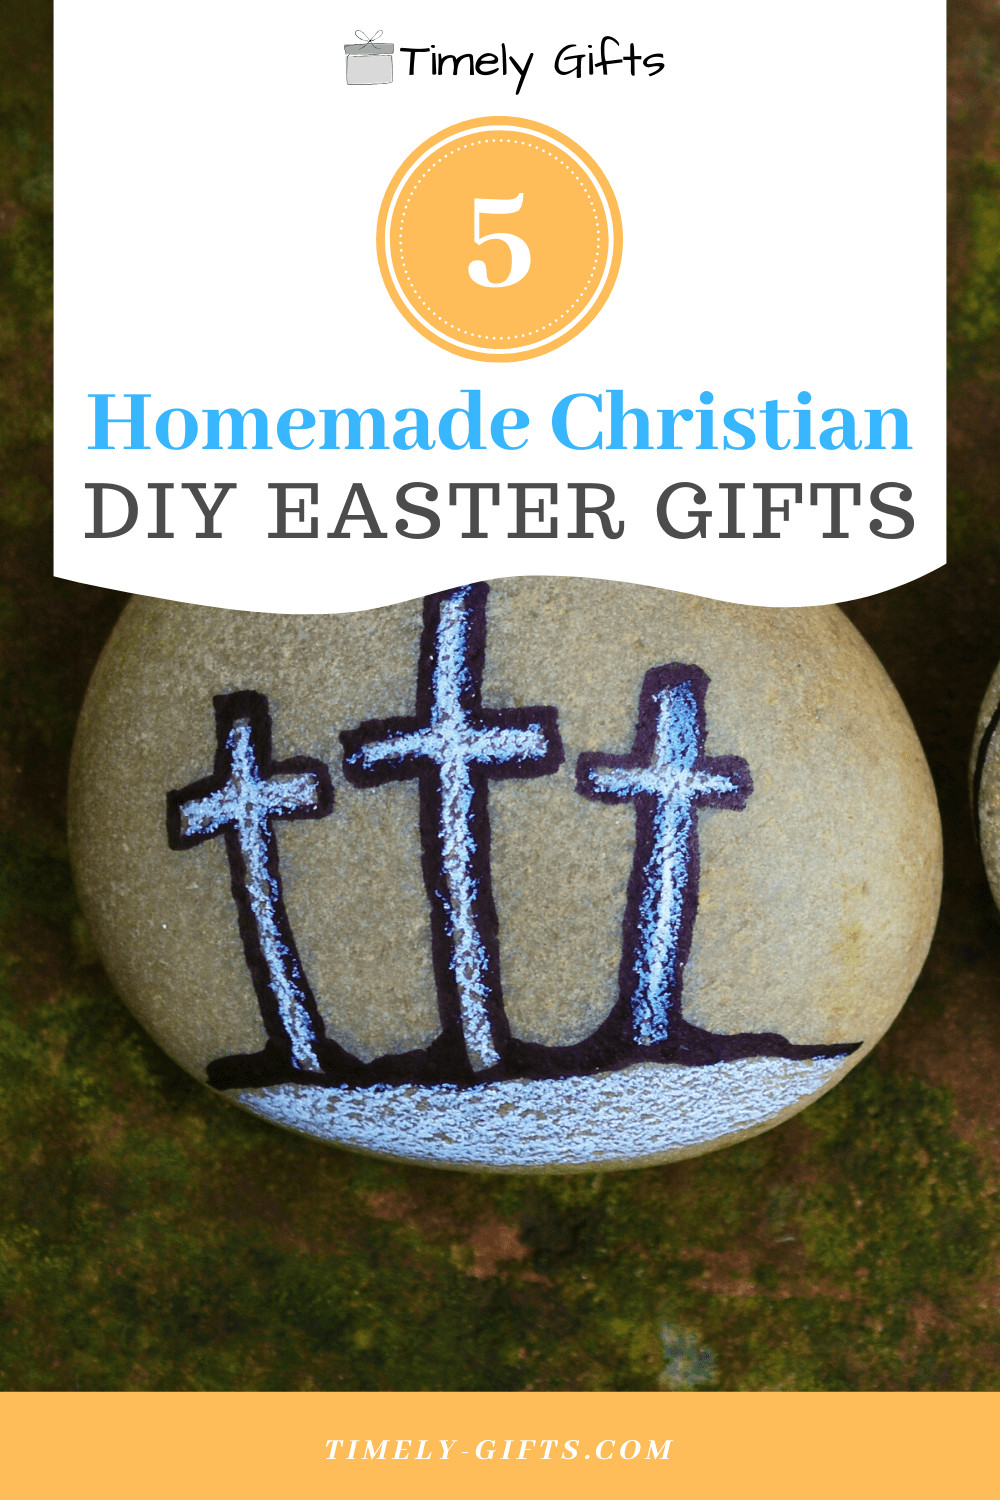 Christian Easter Gifts
 5 DIY Homemade Christian Easter Gifts that Celebrate Jesus